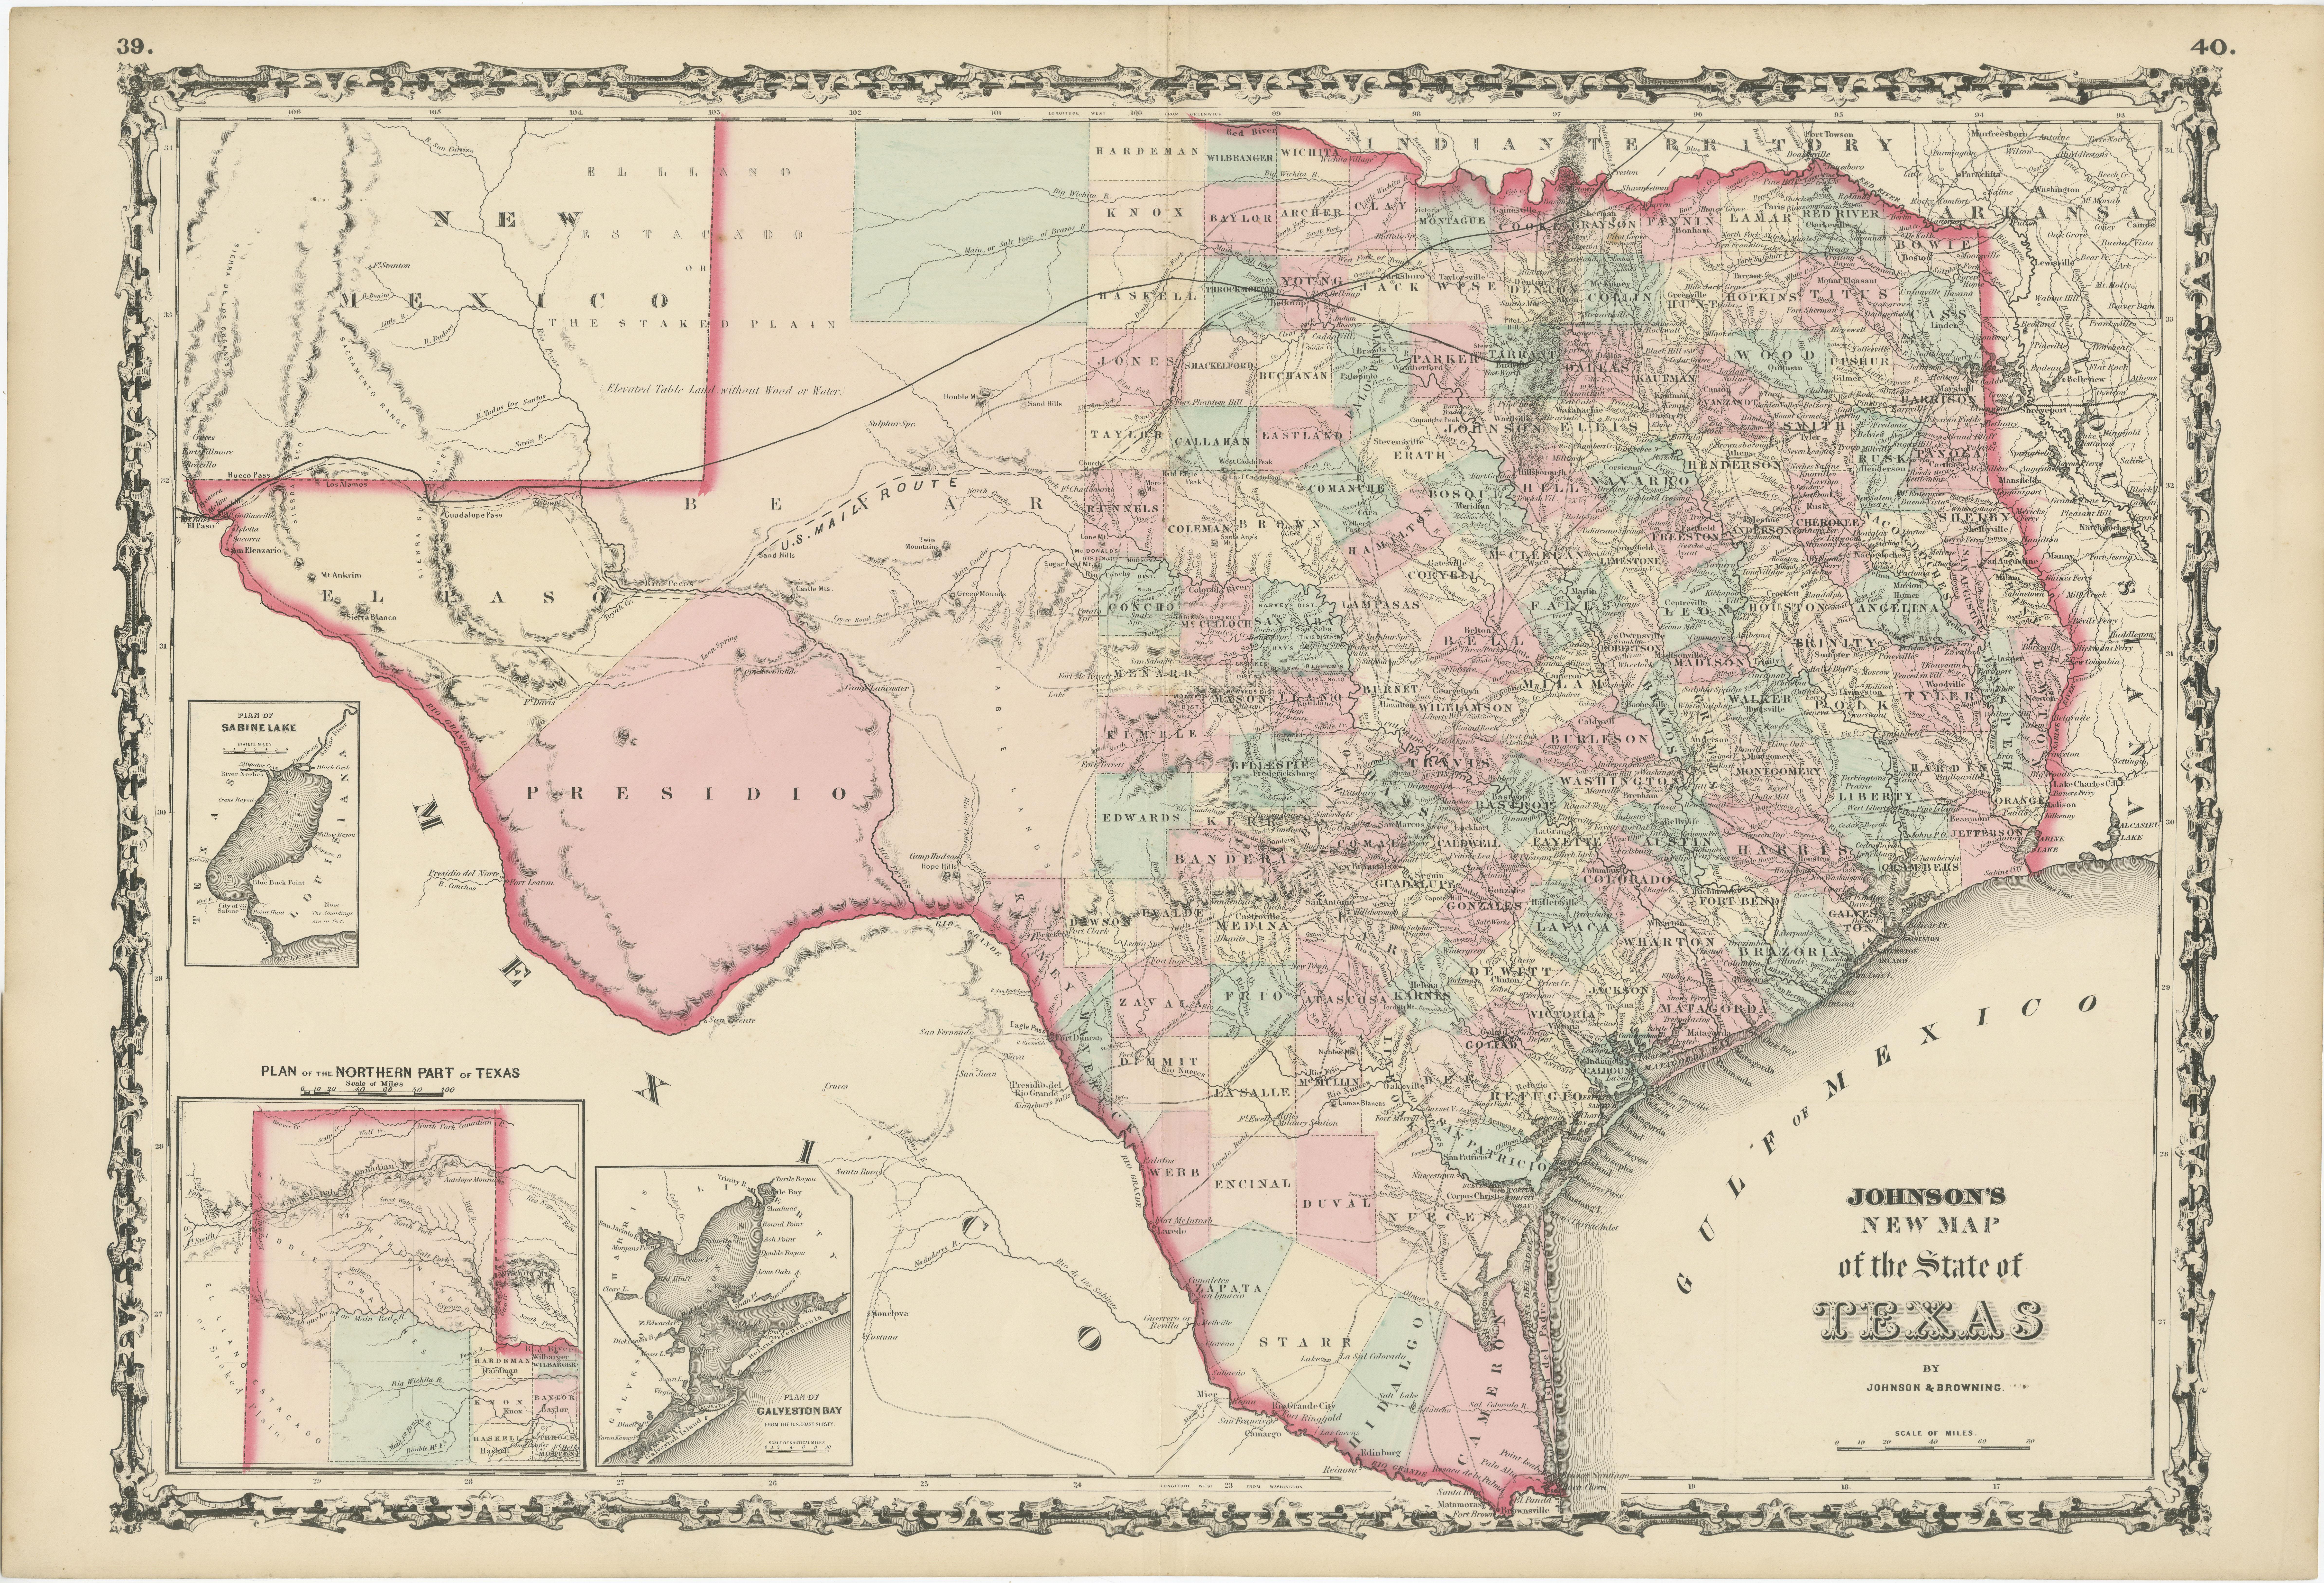 Antique map titled 'Johnson's New Map of the State of Texas' Large map of Texas, shows railroads, wagon roads, the U.S. Mail Route, rivers, ports, large towns, and villages of the mid-19th century. Much of the western portion of the state is divided